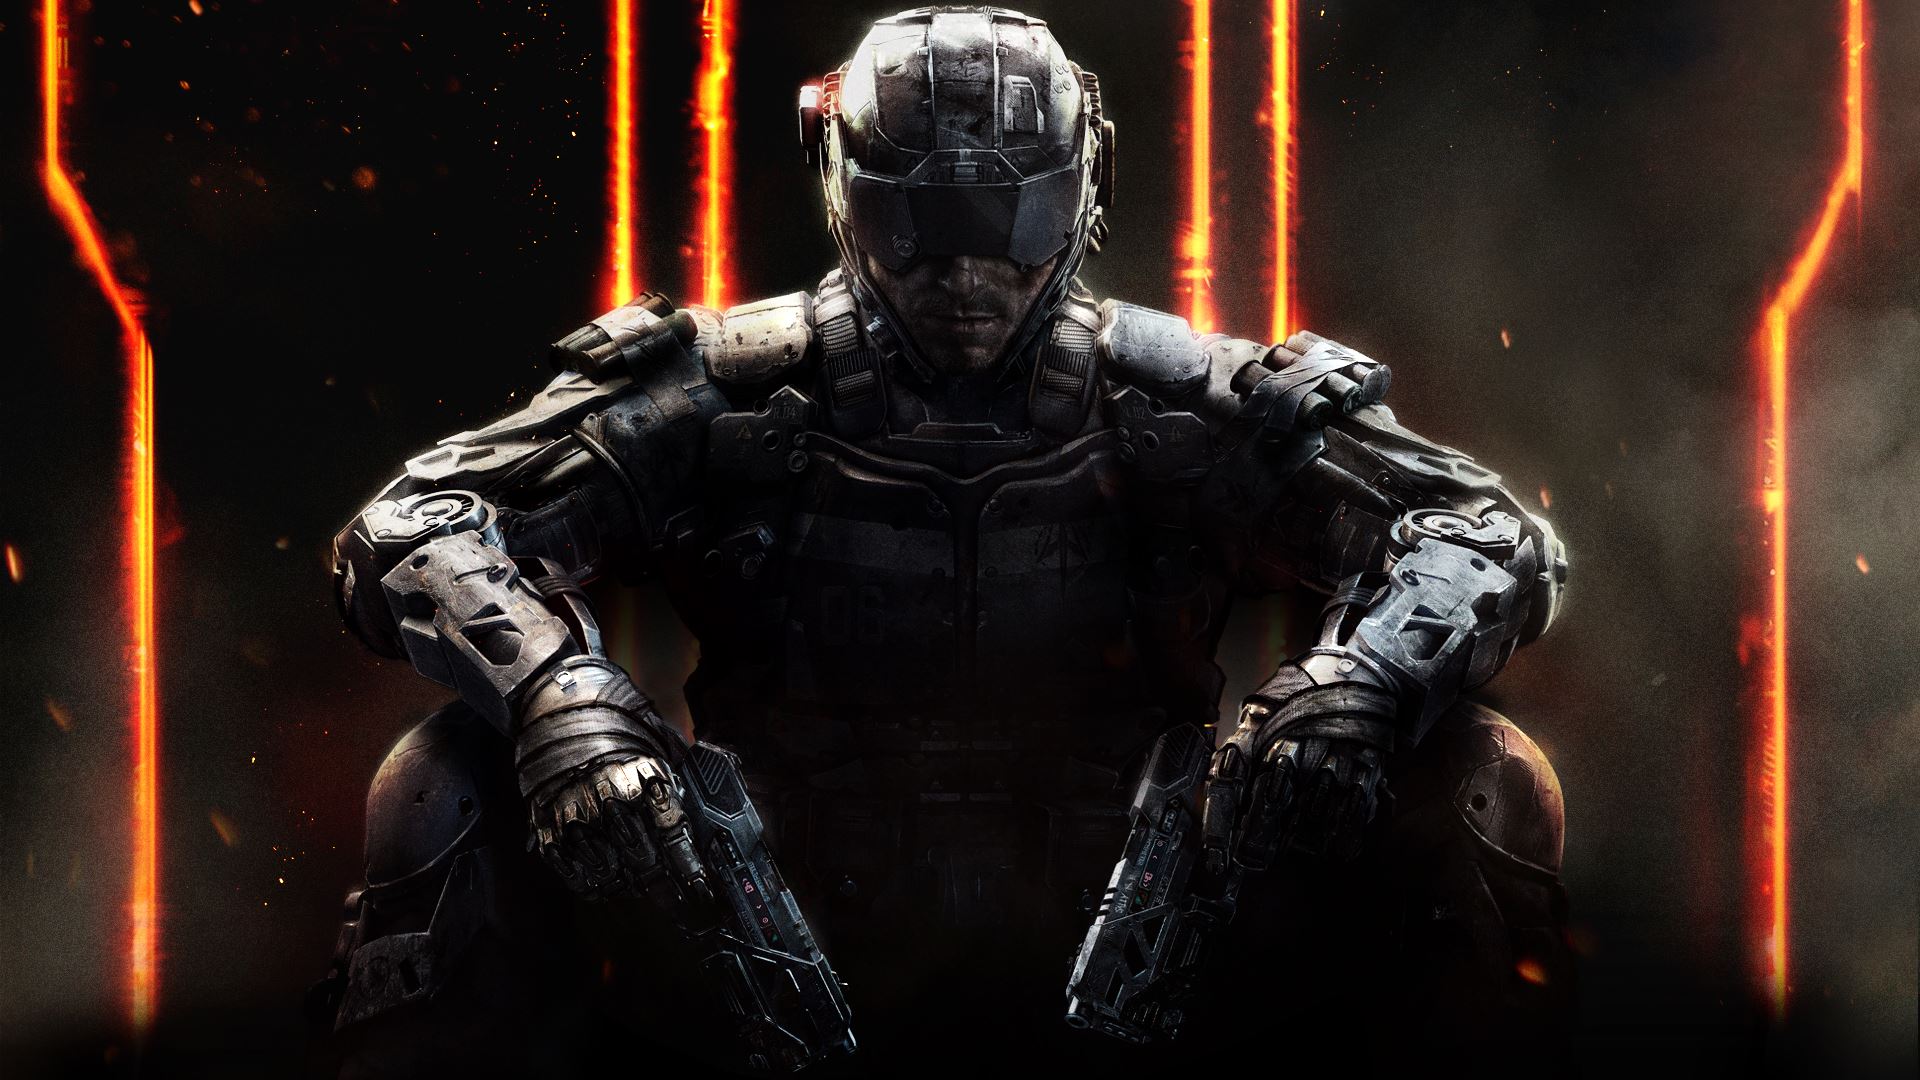 Call of Duty: Black Ops III Review: More machine than man now